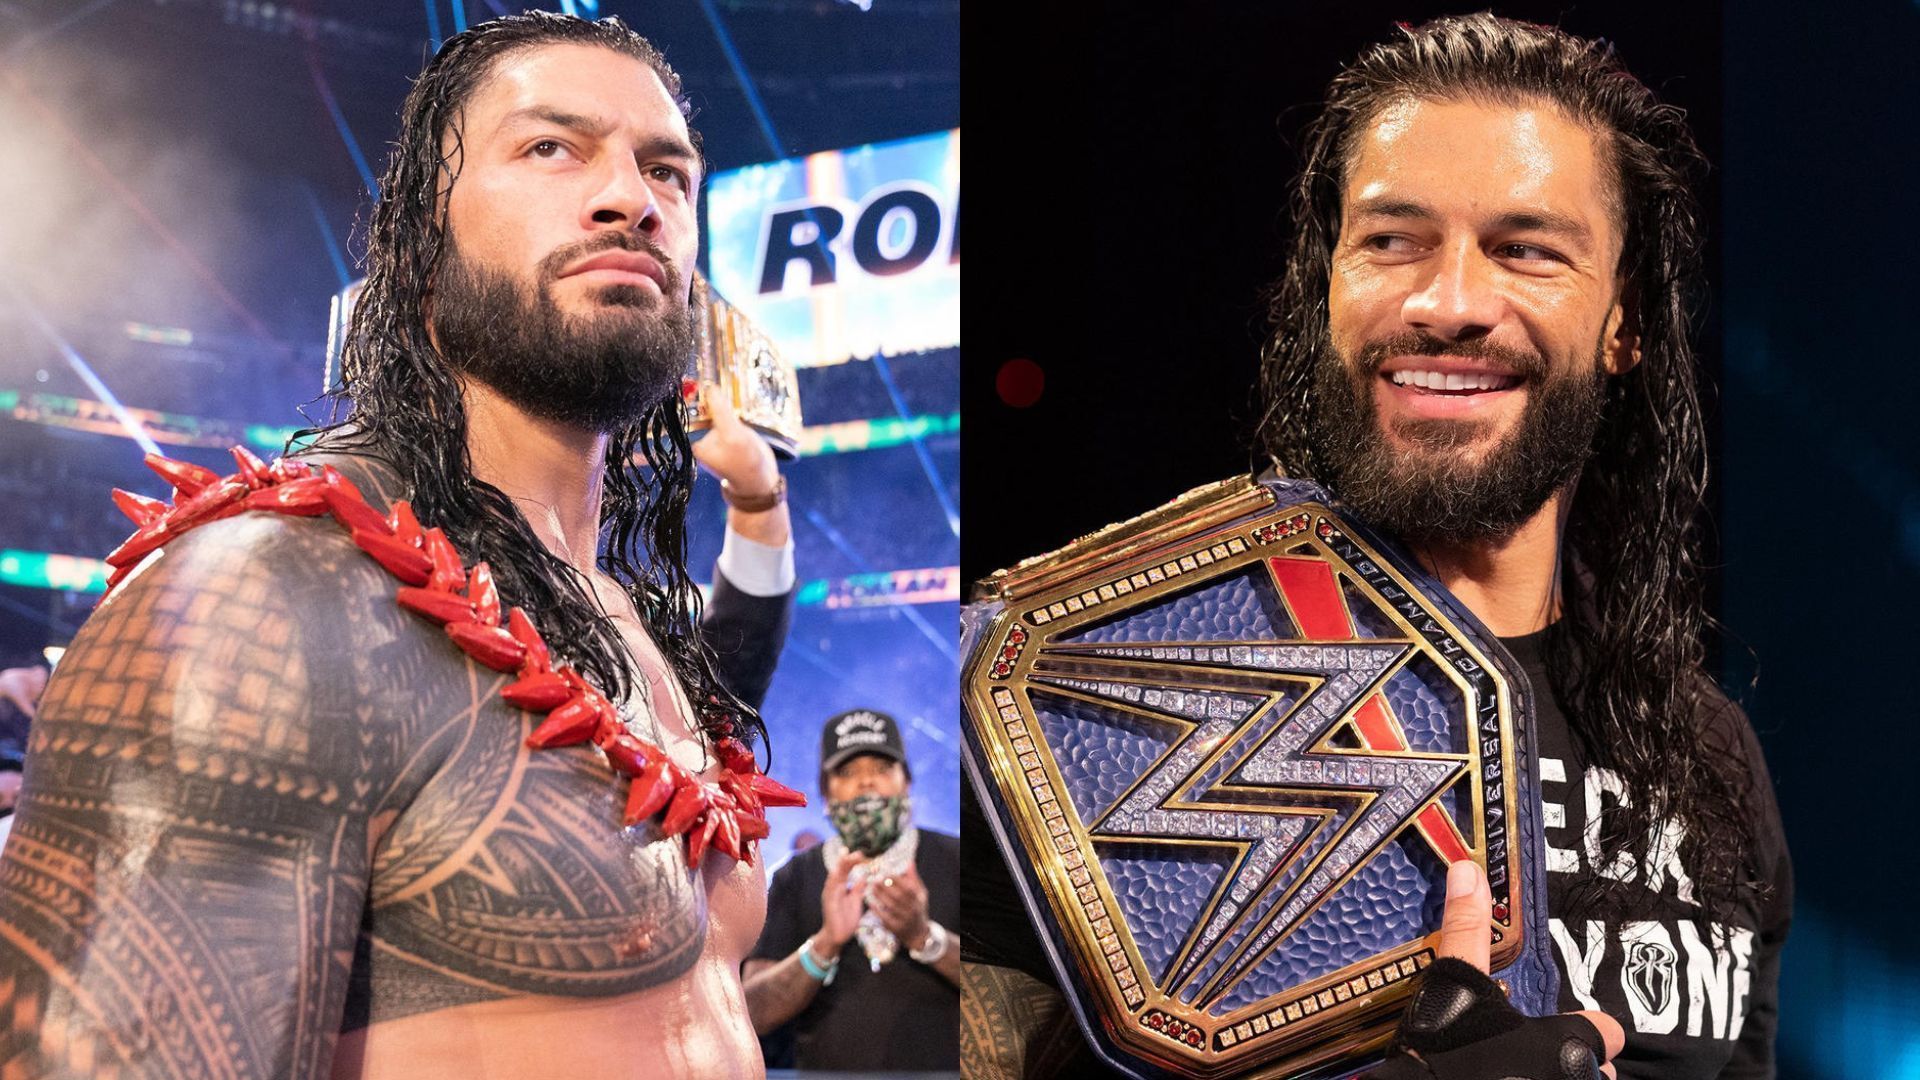 Reigns will be appearing tonight on SmackDown.